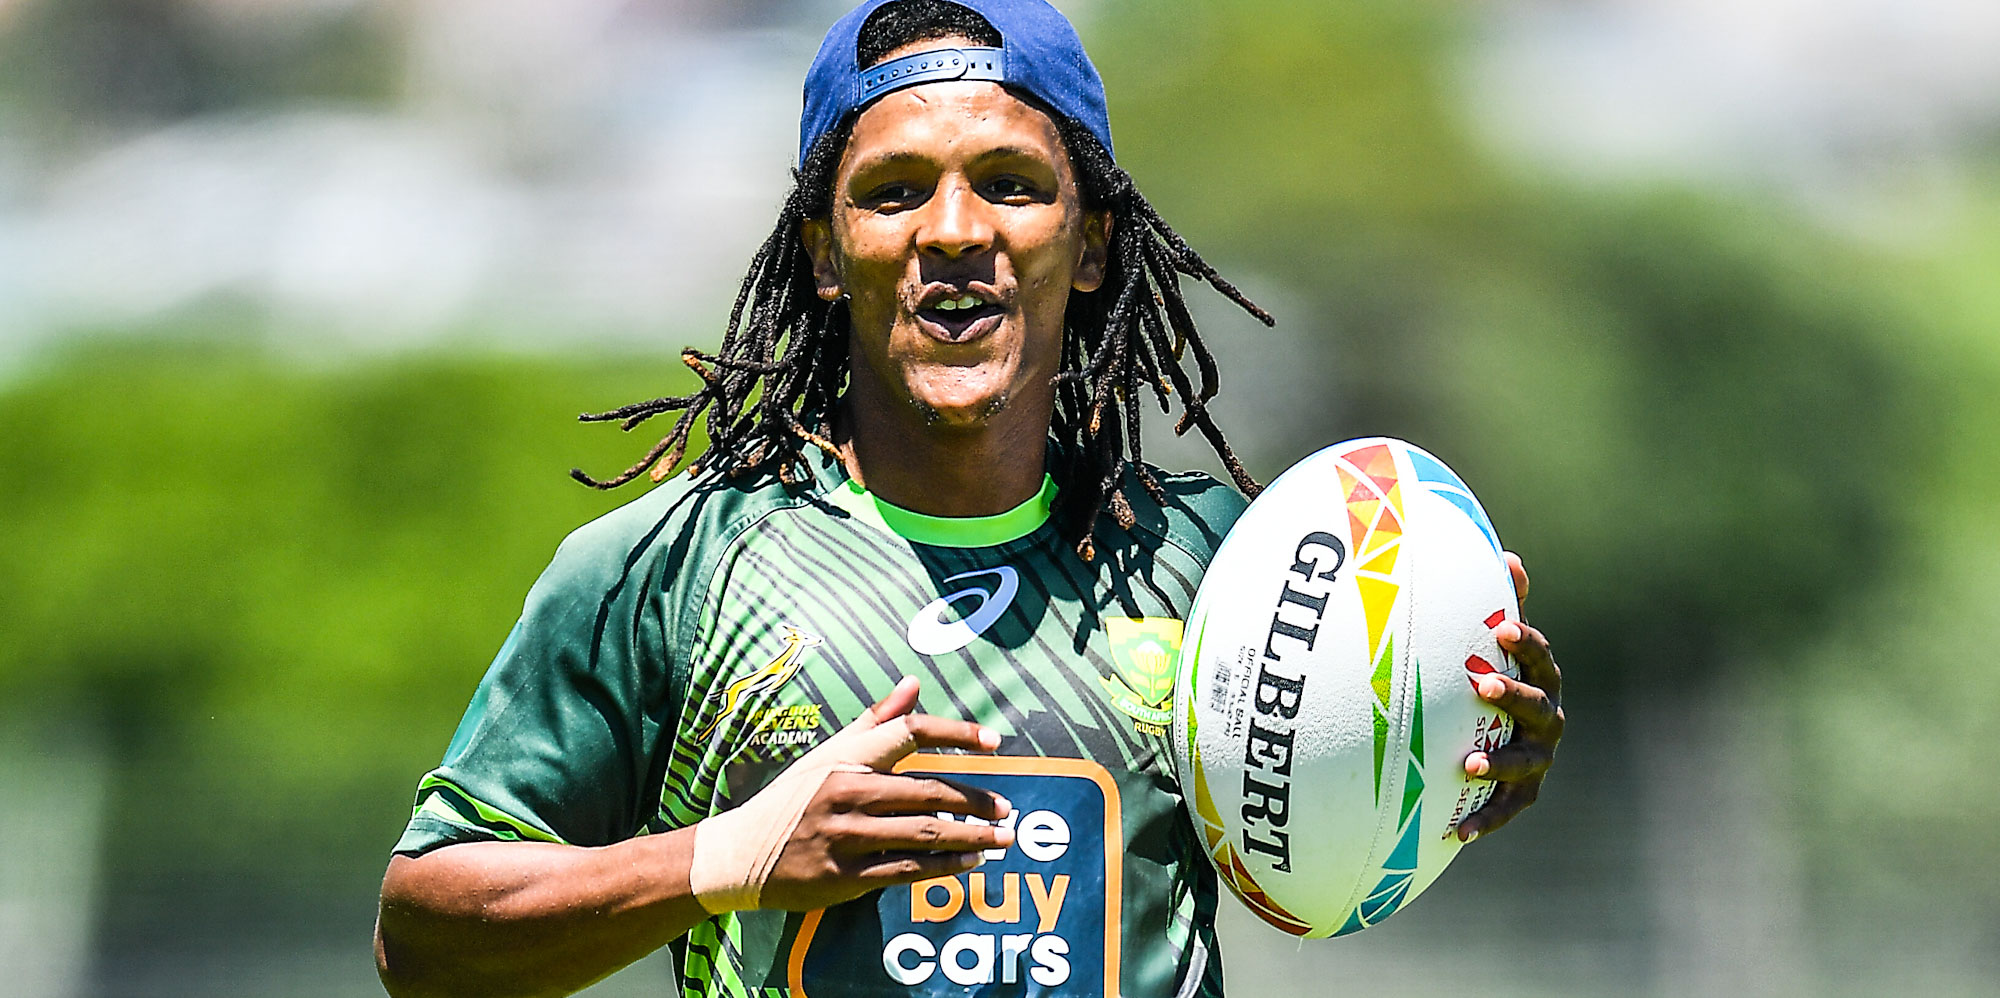 Jaiden Baron is the only uncapped player with the Blitzboks in New Zealand.